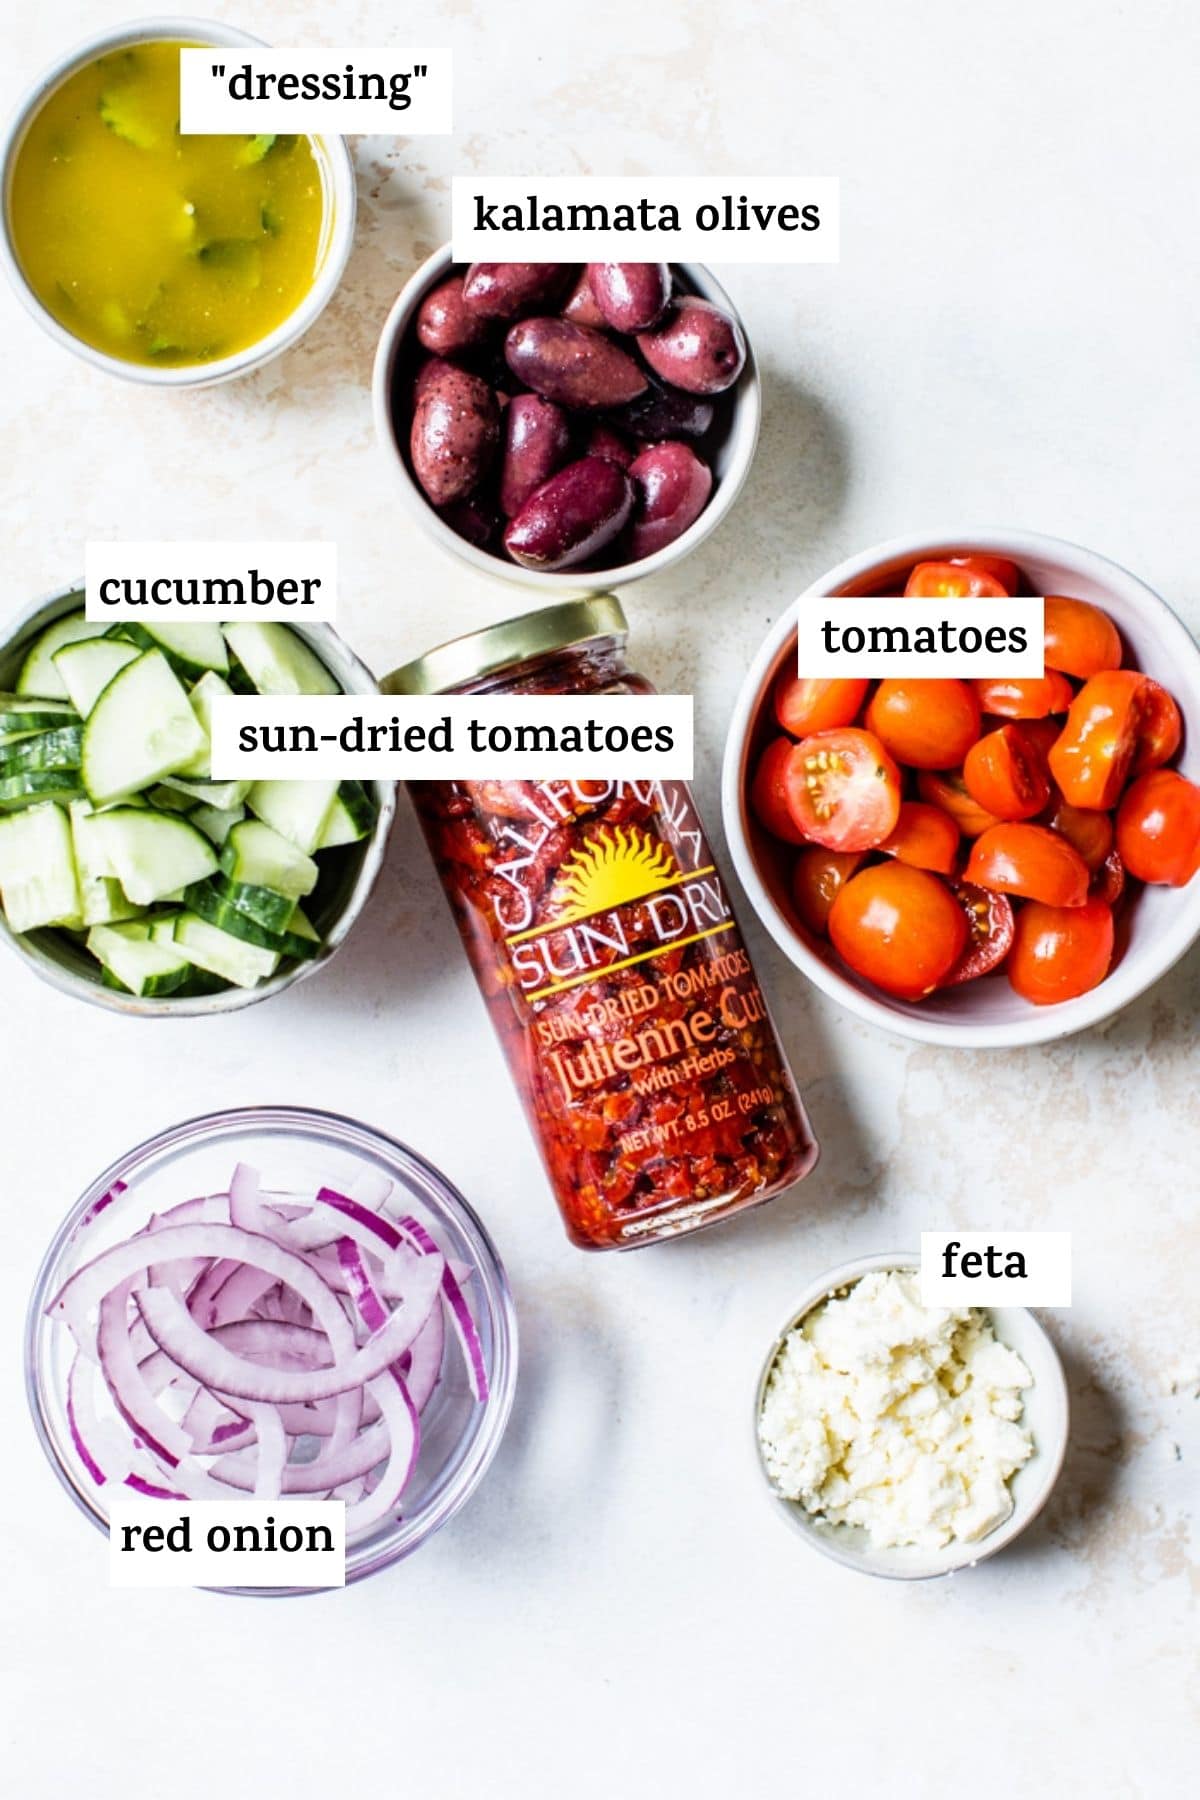 ingredients to make pasta salad like sun-dried tomatoes and red onion